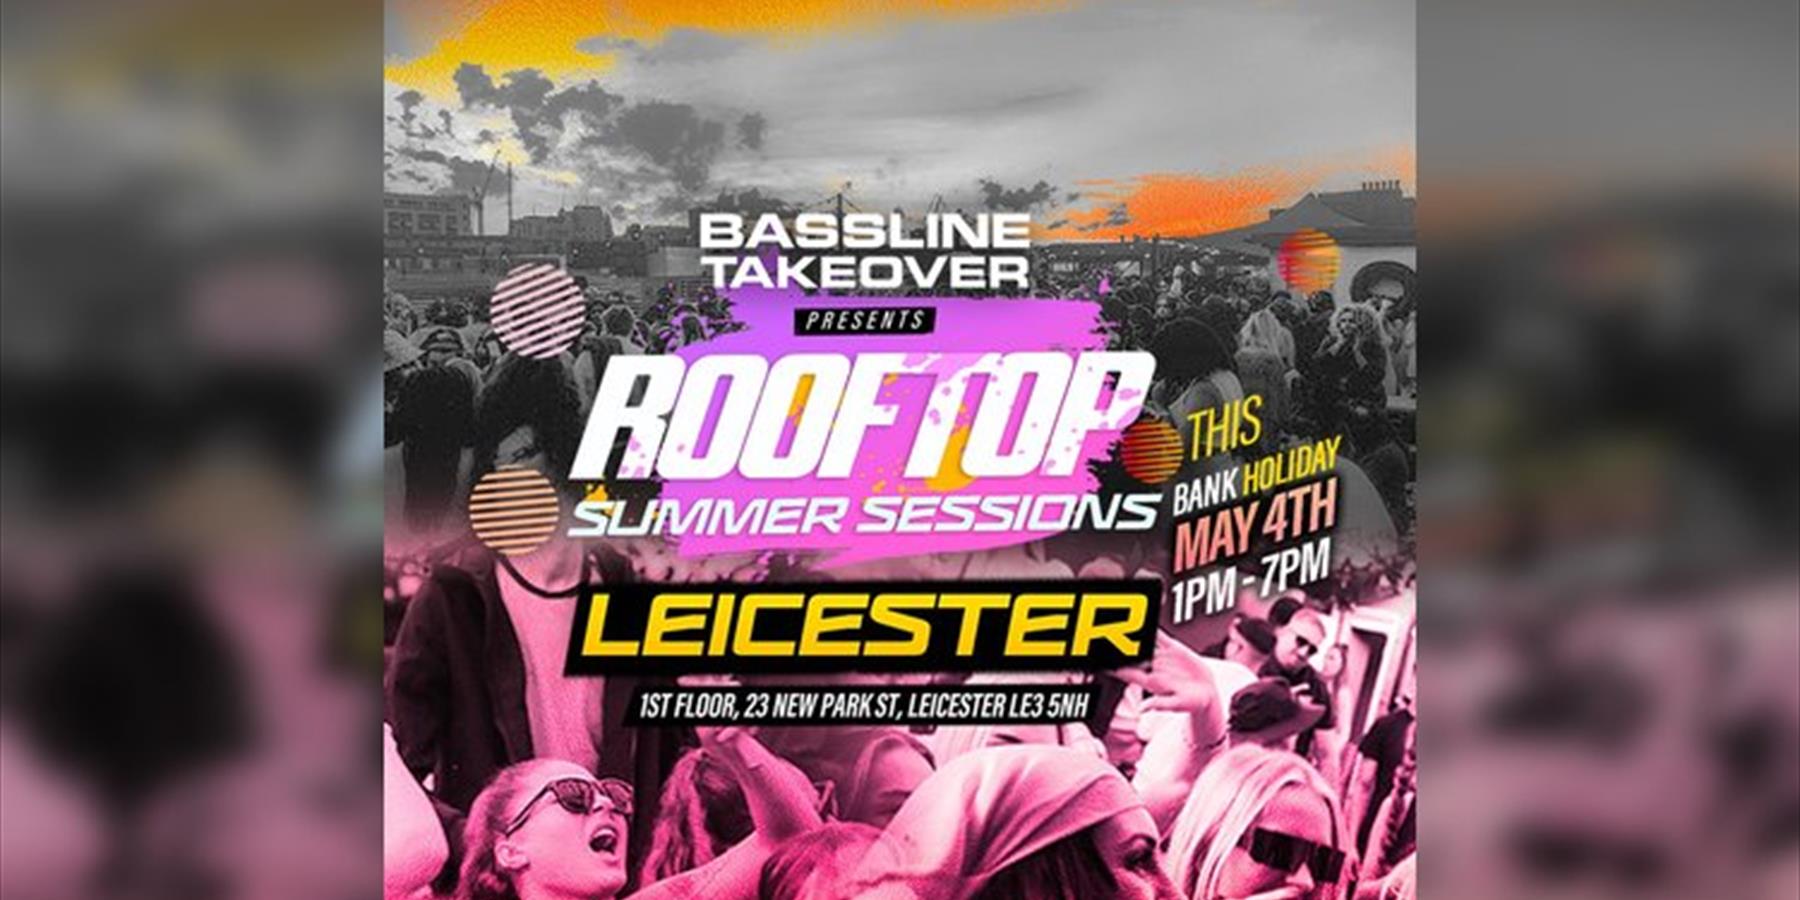 Bassline Takeover Leicester Rooftop Summer Sessions